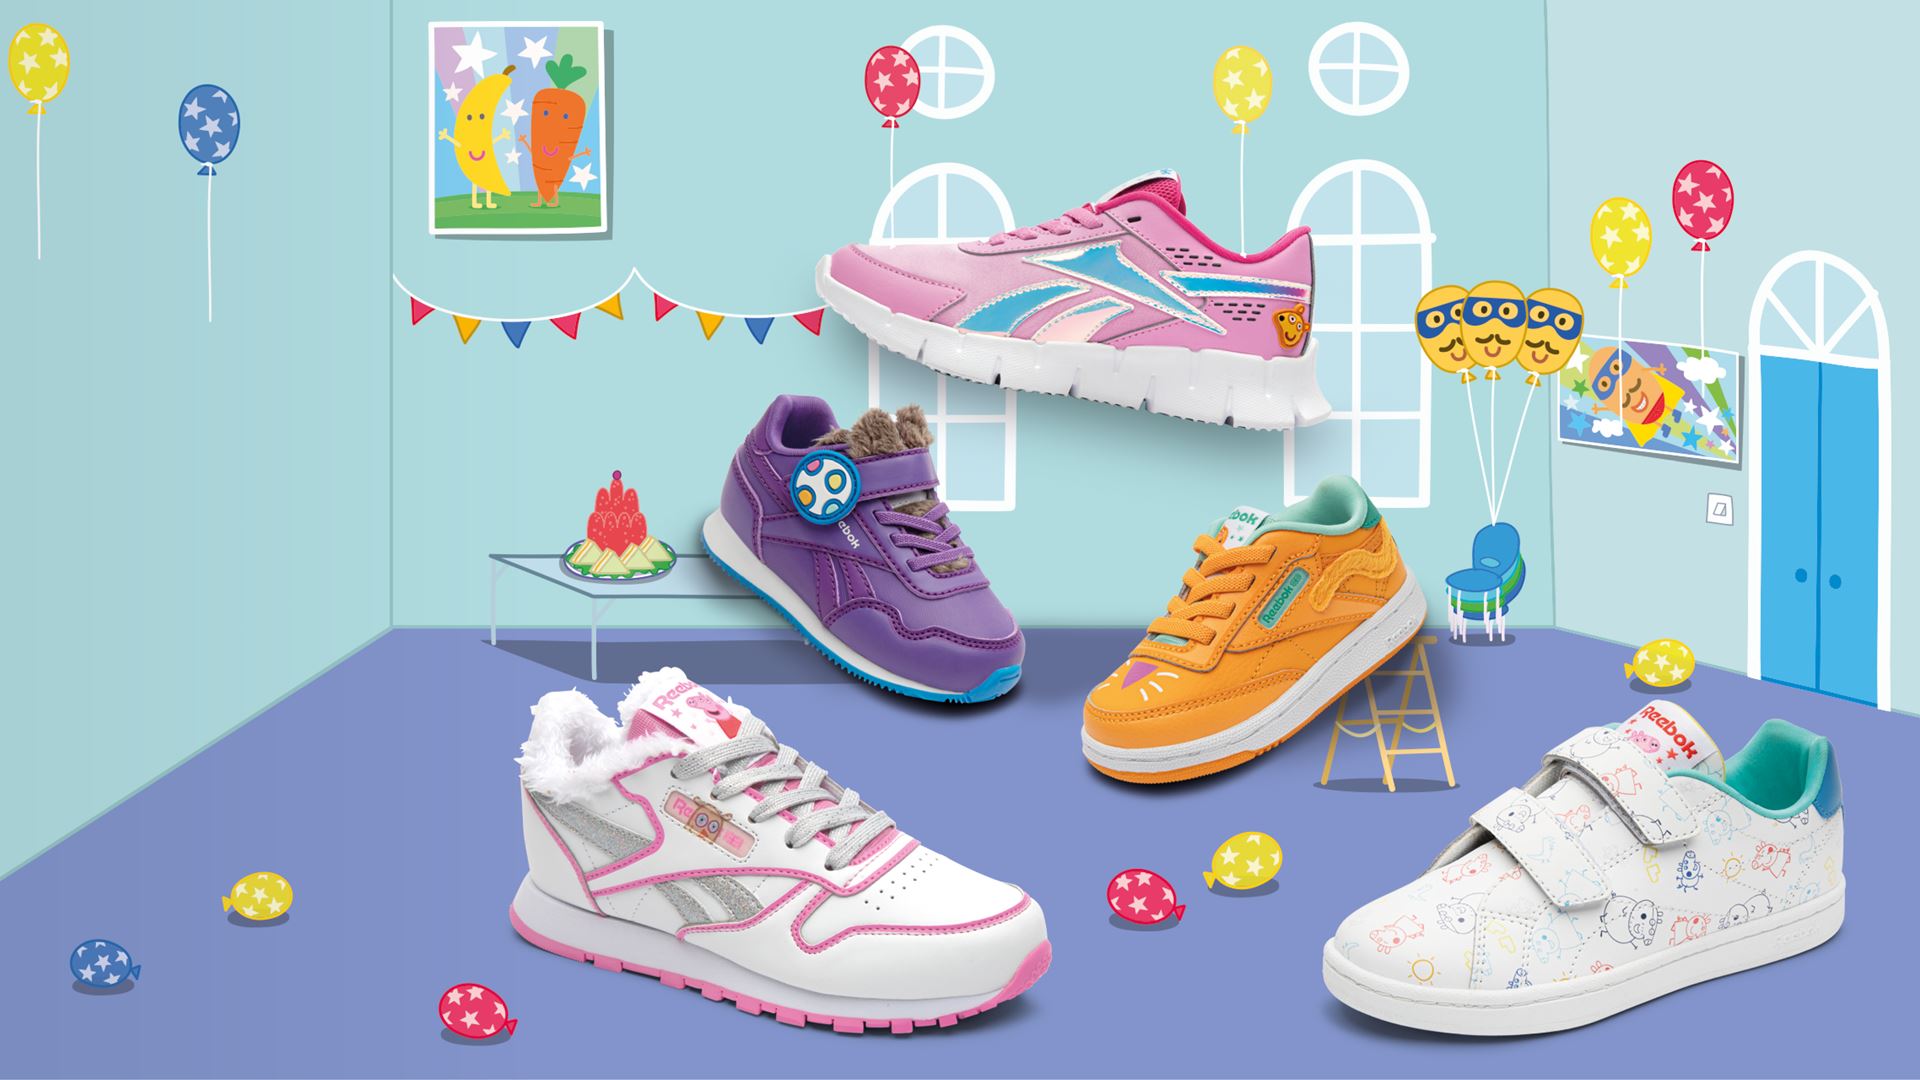 Significativo Cabecear fuerte Reebok Announces Peppa Pig Collection Inspired by Peppa's Family & Friends